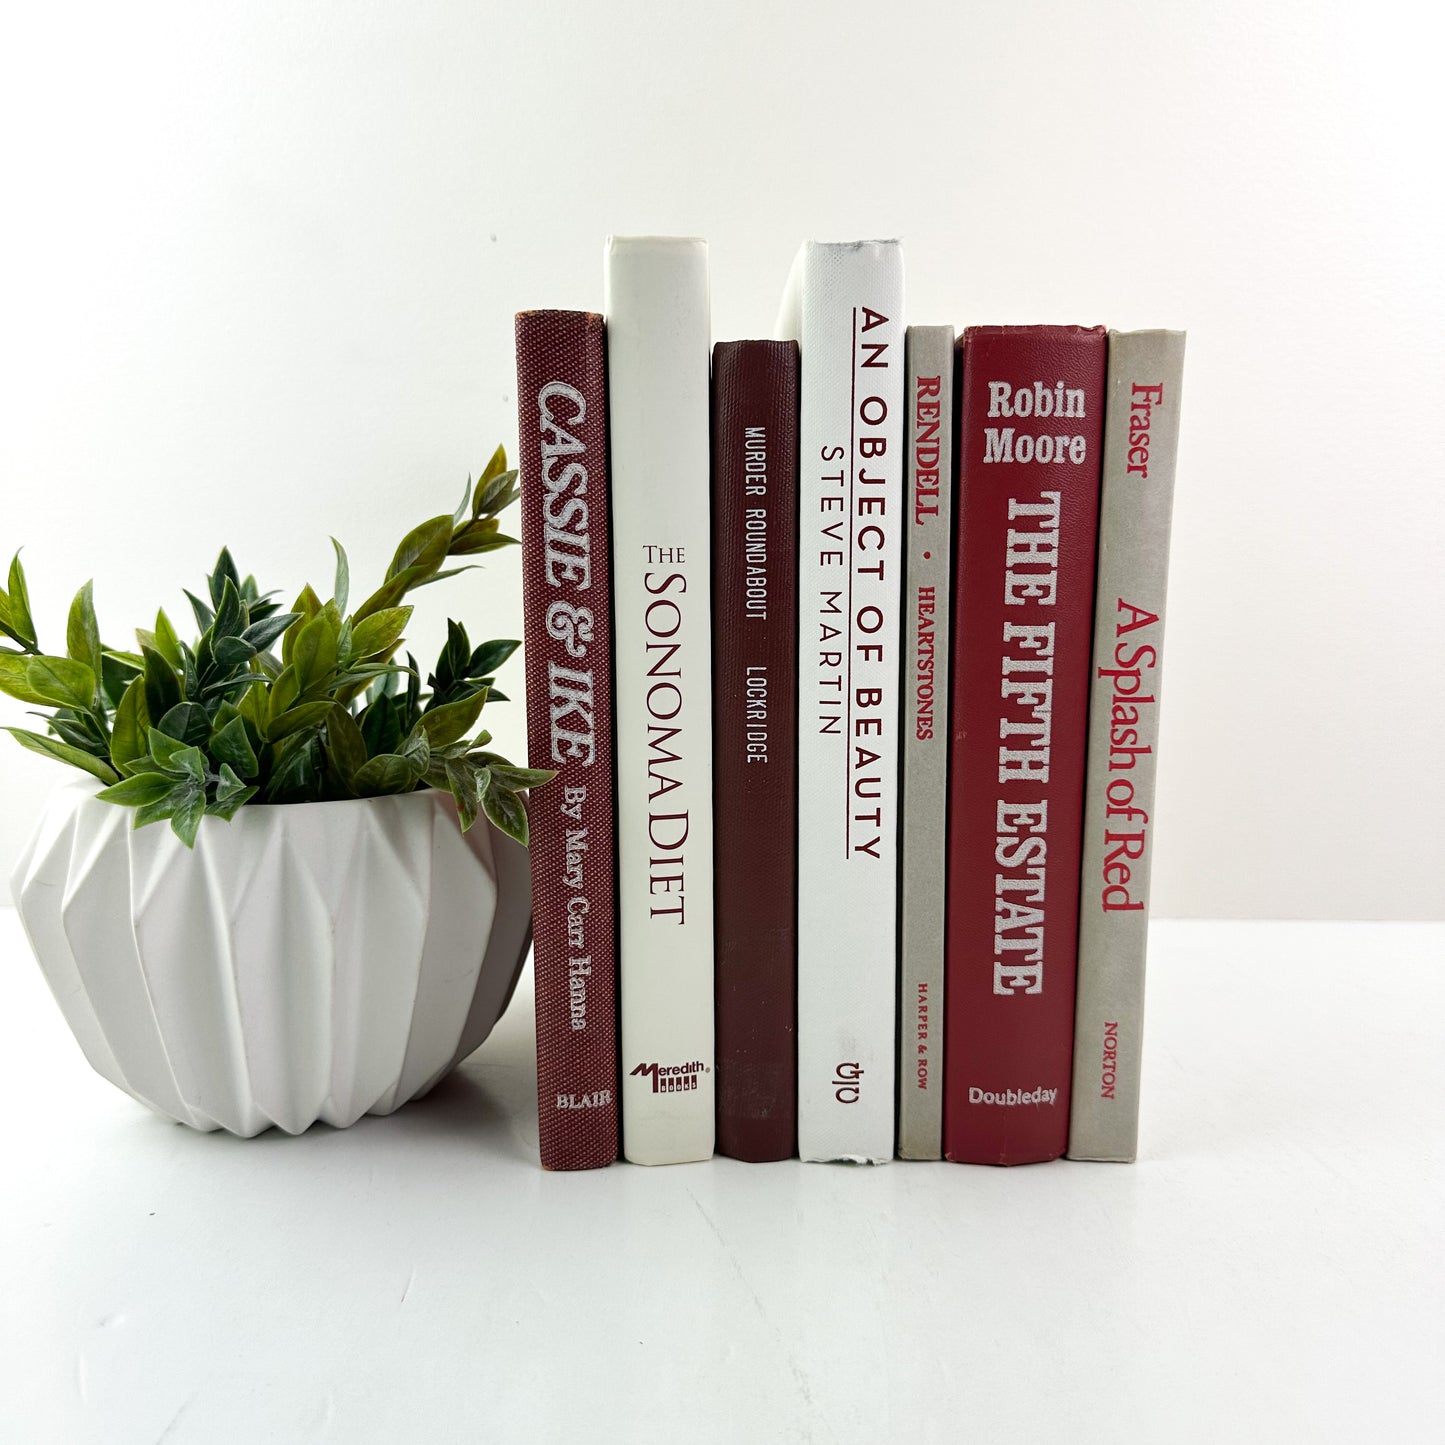 Red and Gray Book Decor